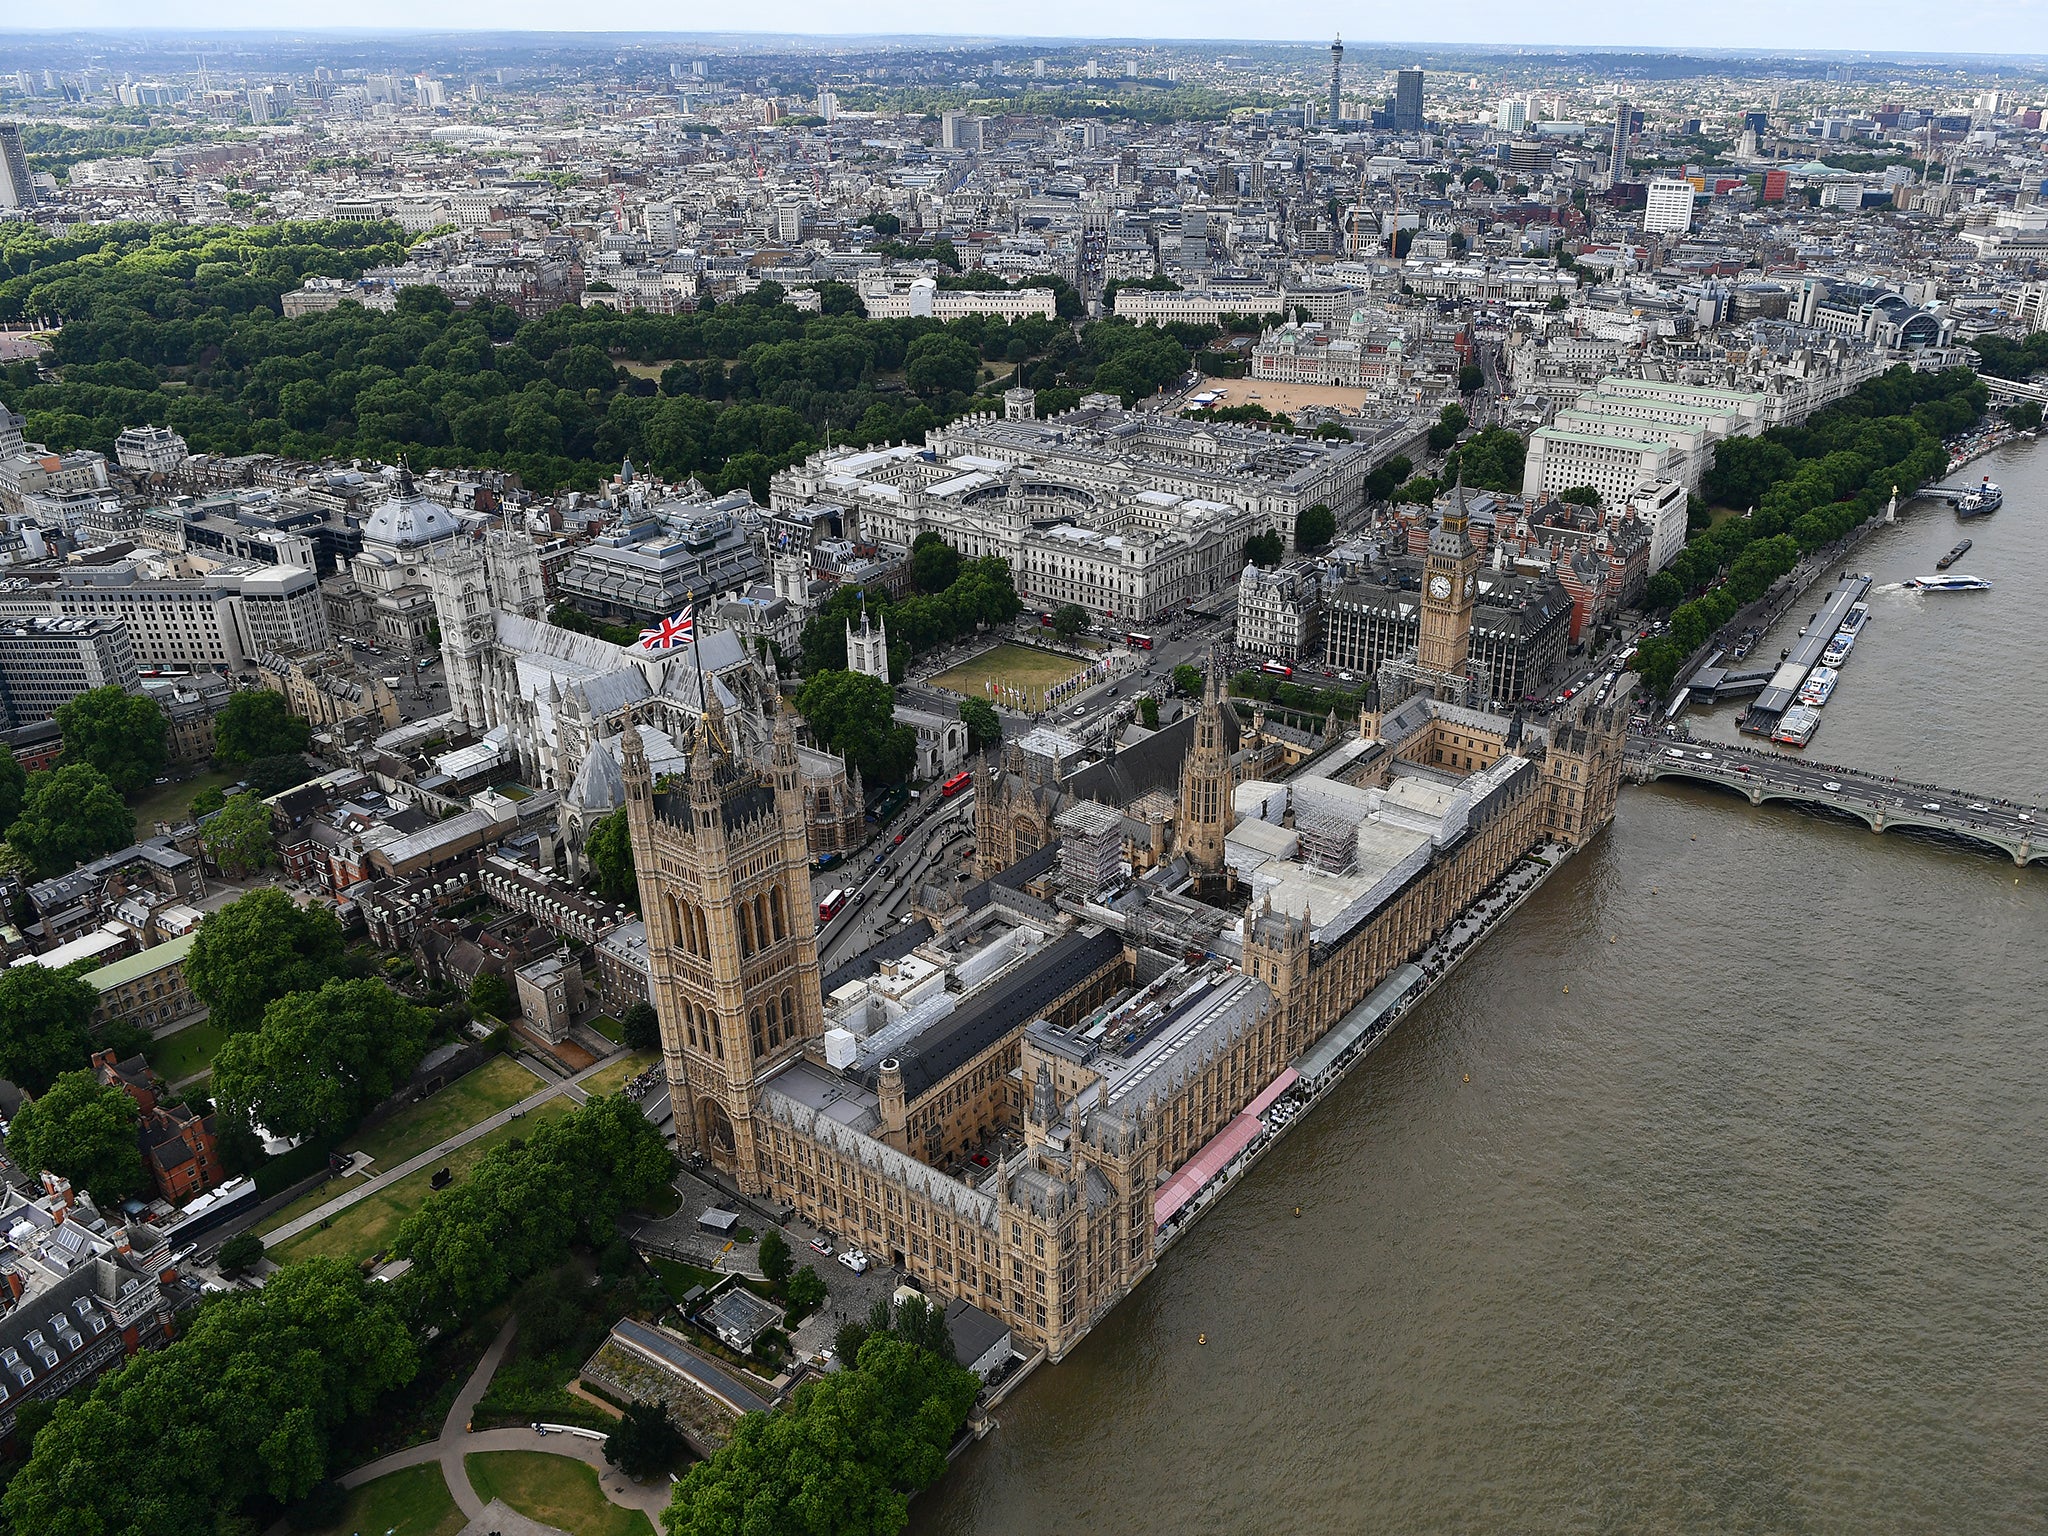 The renovation of the Palace of Westminster is estimated to cost £3.5bn